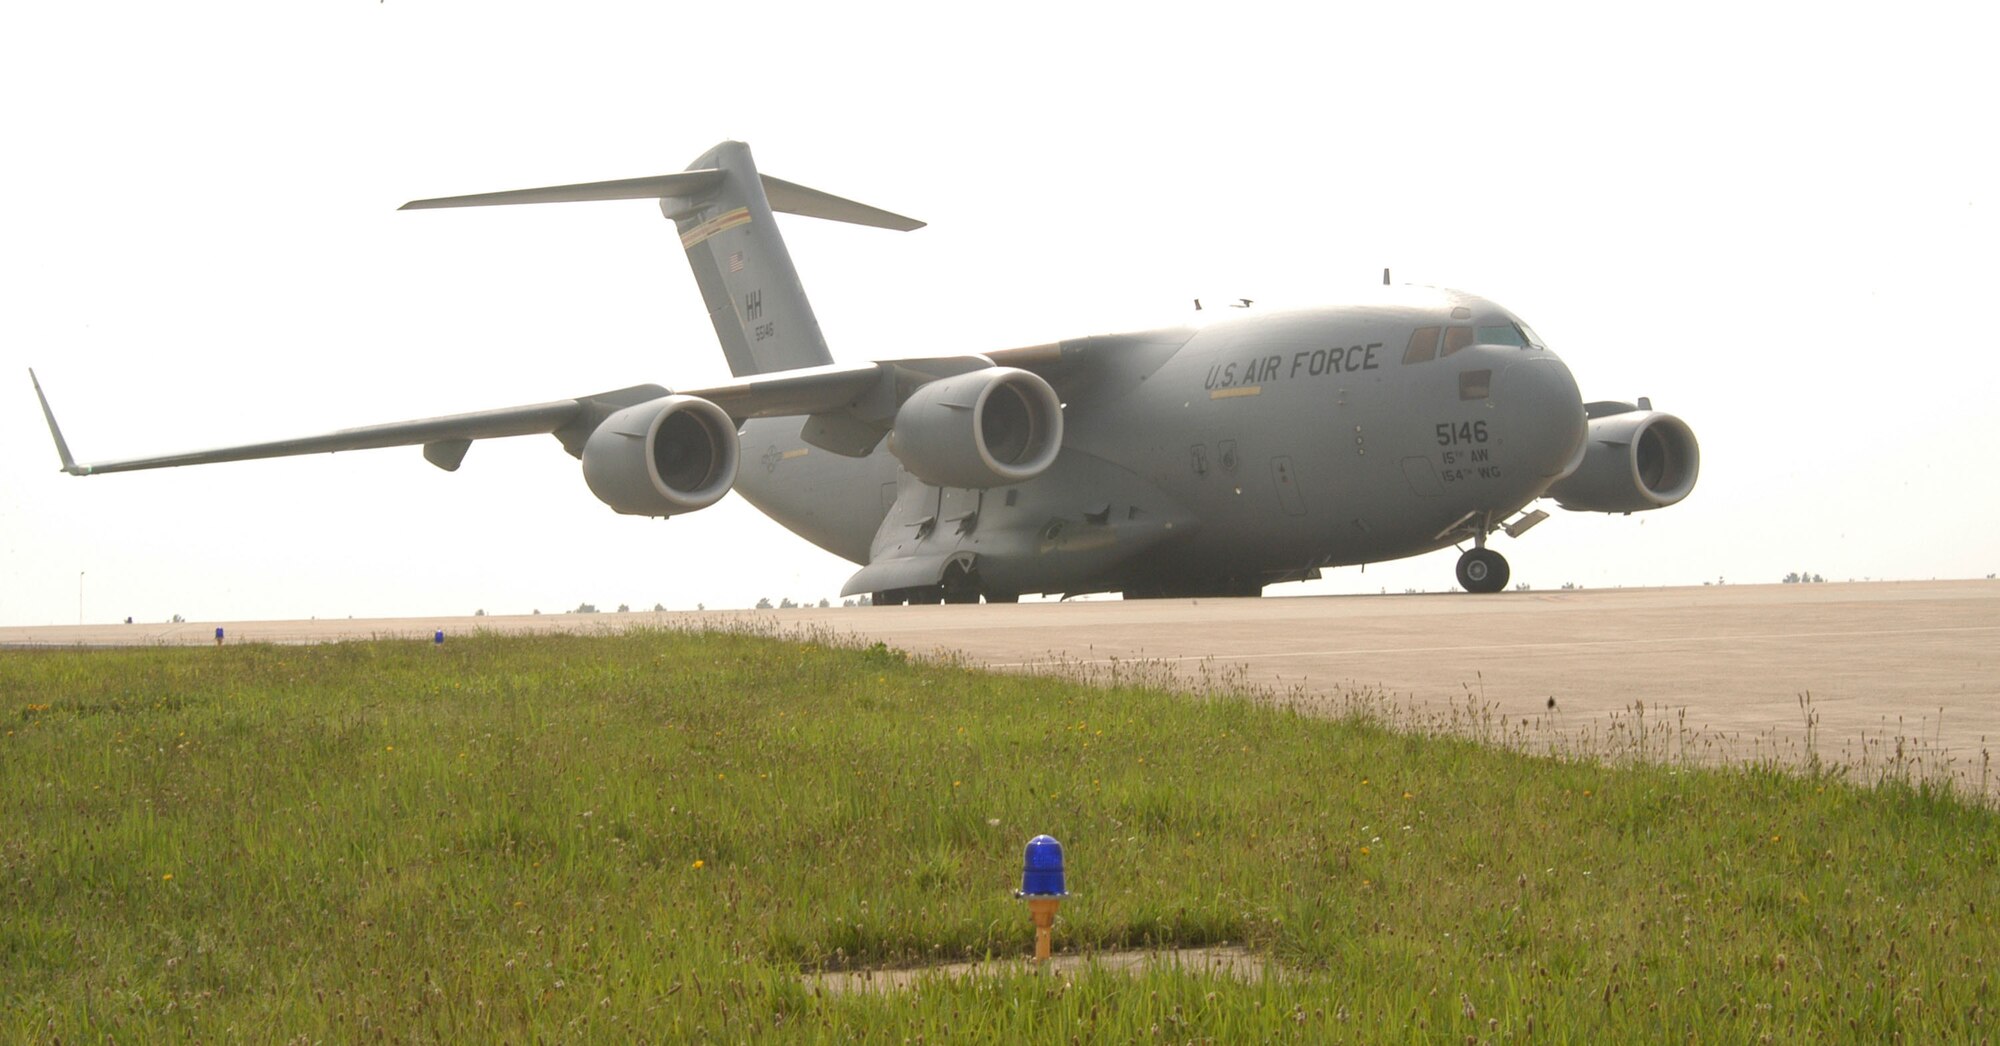 KUNSAN AIR BASE, Republic of Korea -- A C-17 Globemaster III, known as the "Spirit of Hawaii," taxies toward its parking spot on the base's flightline July 8. The aircraft transported more than 40 maintainers and equipment in support of the 555th Expeditionary Fighter Squadron's deployment here. More than 10 F-16 Fighting Falcons assigned to the 555th EFS arrived July 7, adding to the six aircraft already deployed here. (U.S. Air Force photo/Senior Airman Stephen Collier)                           